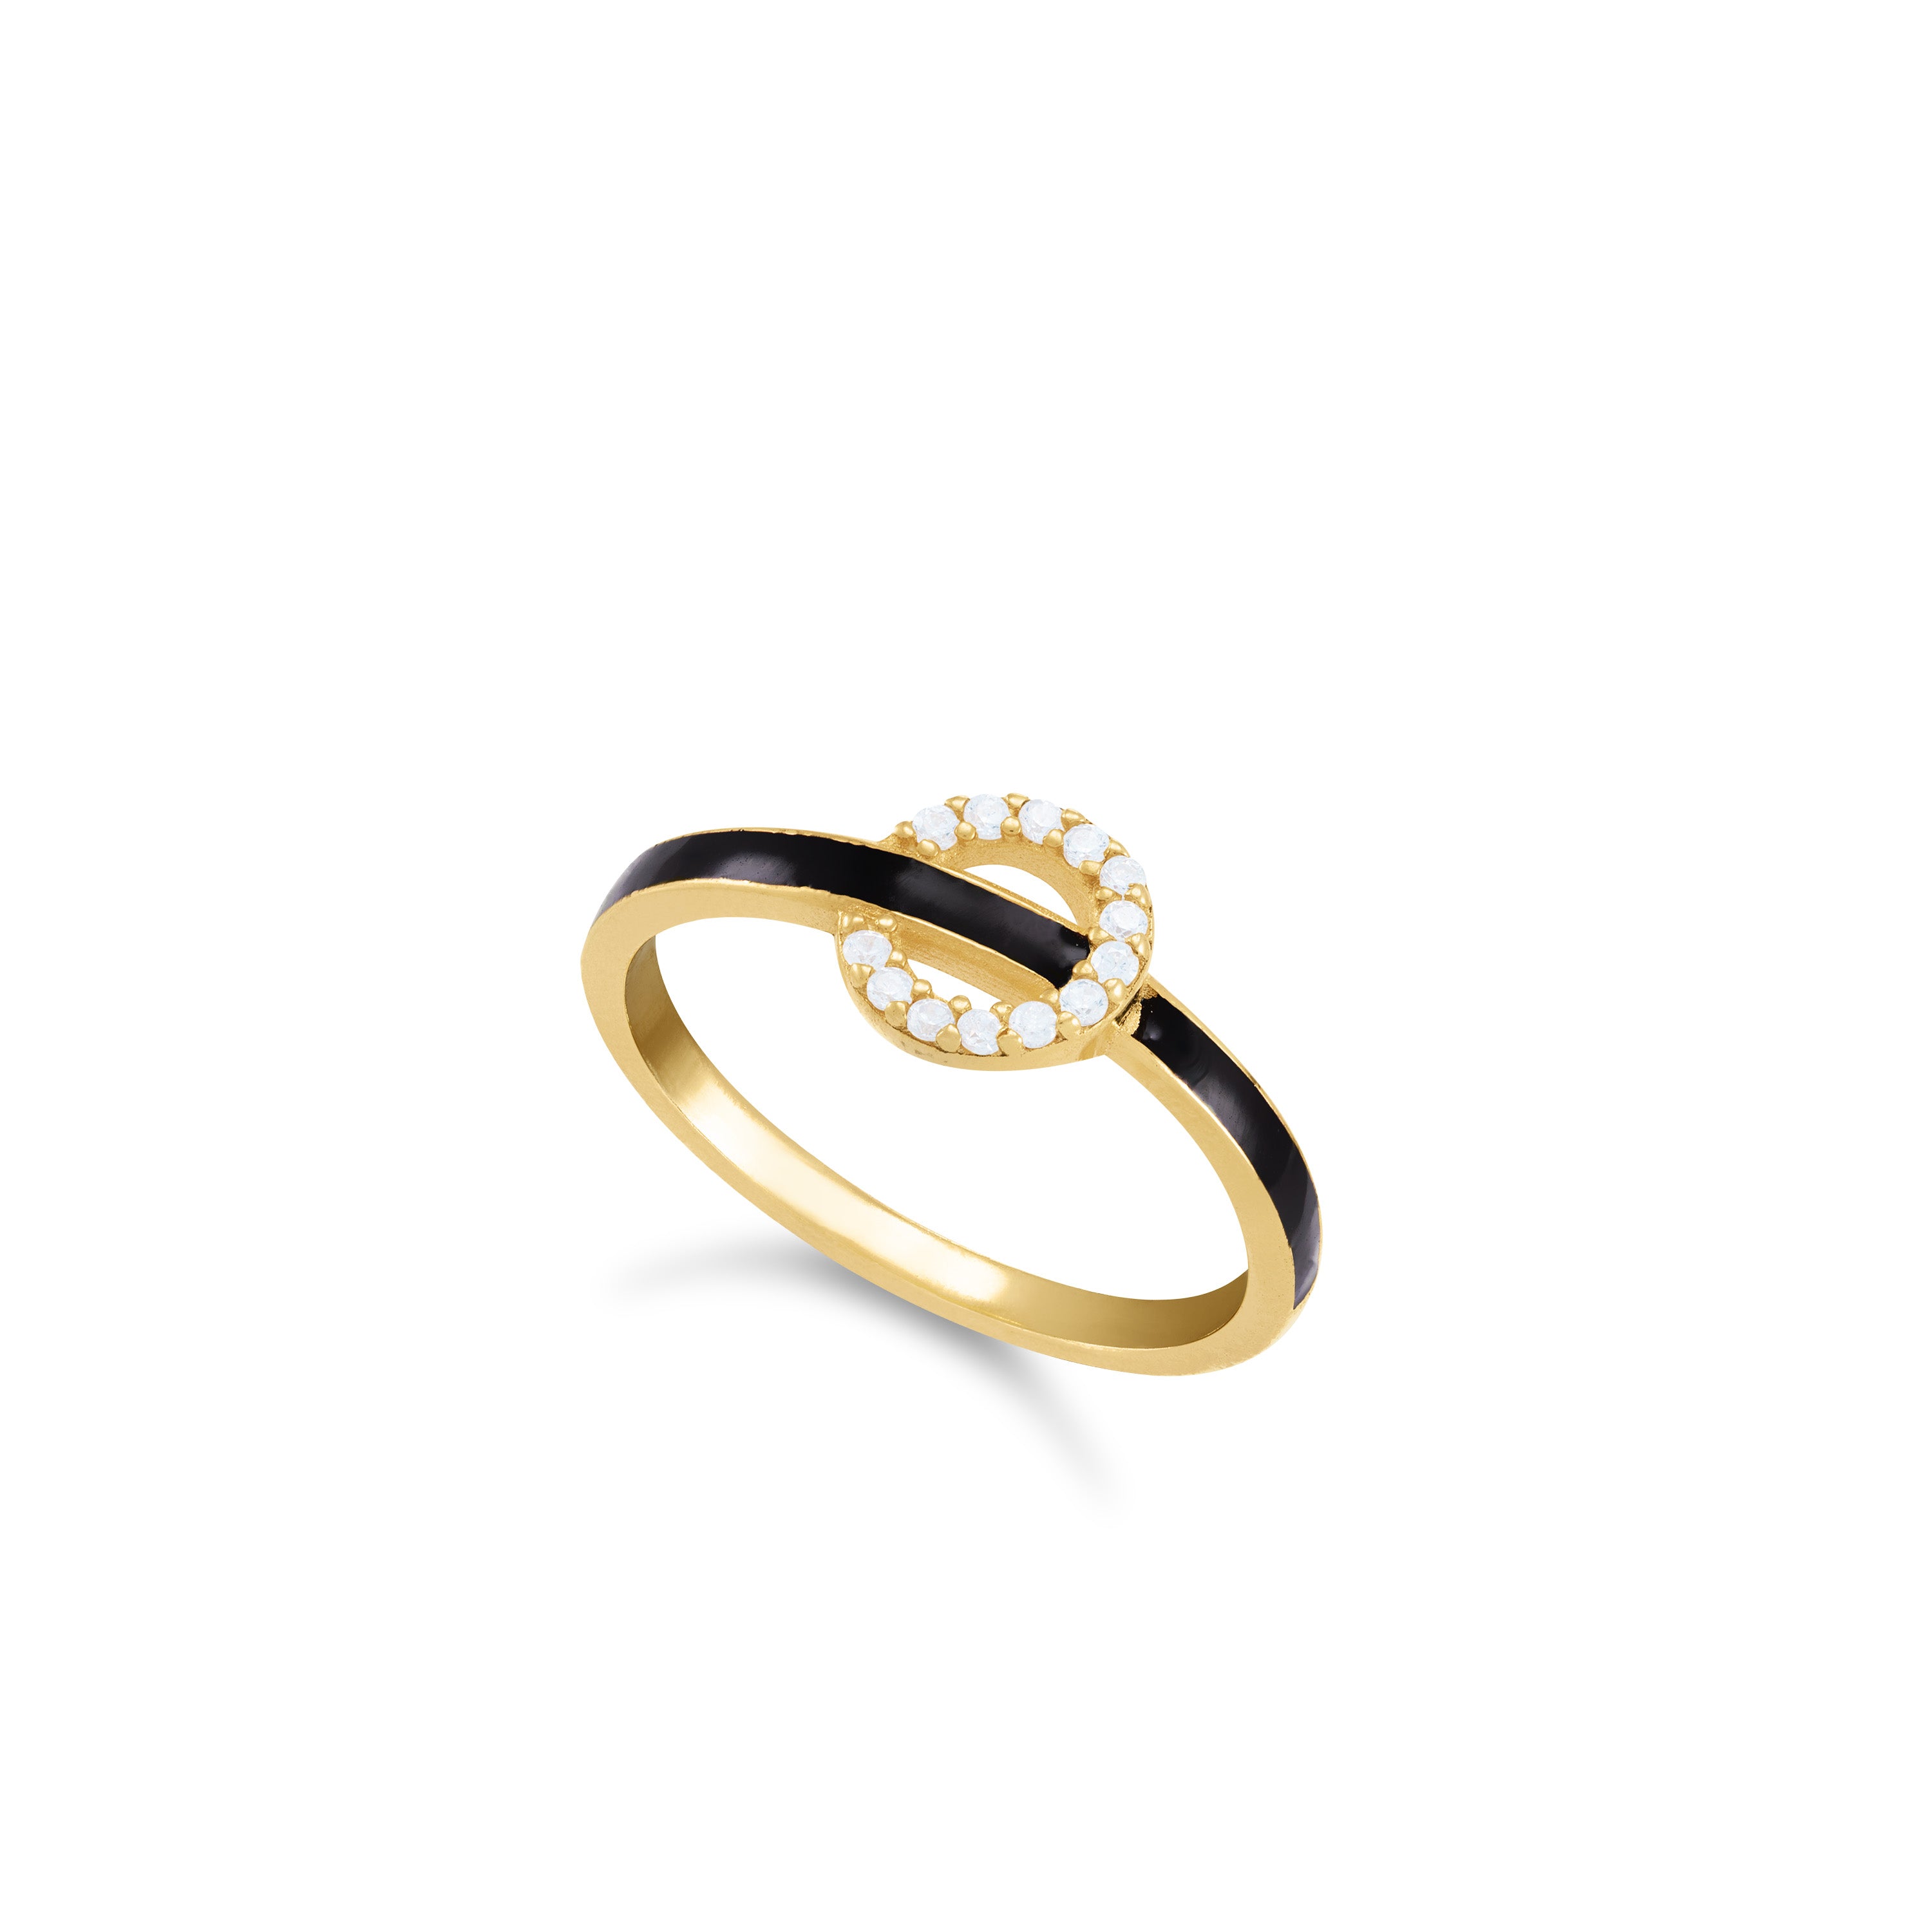 Dainty Enamel Ring With Central Cubic Zirconia Circle